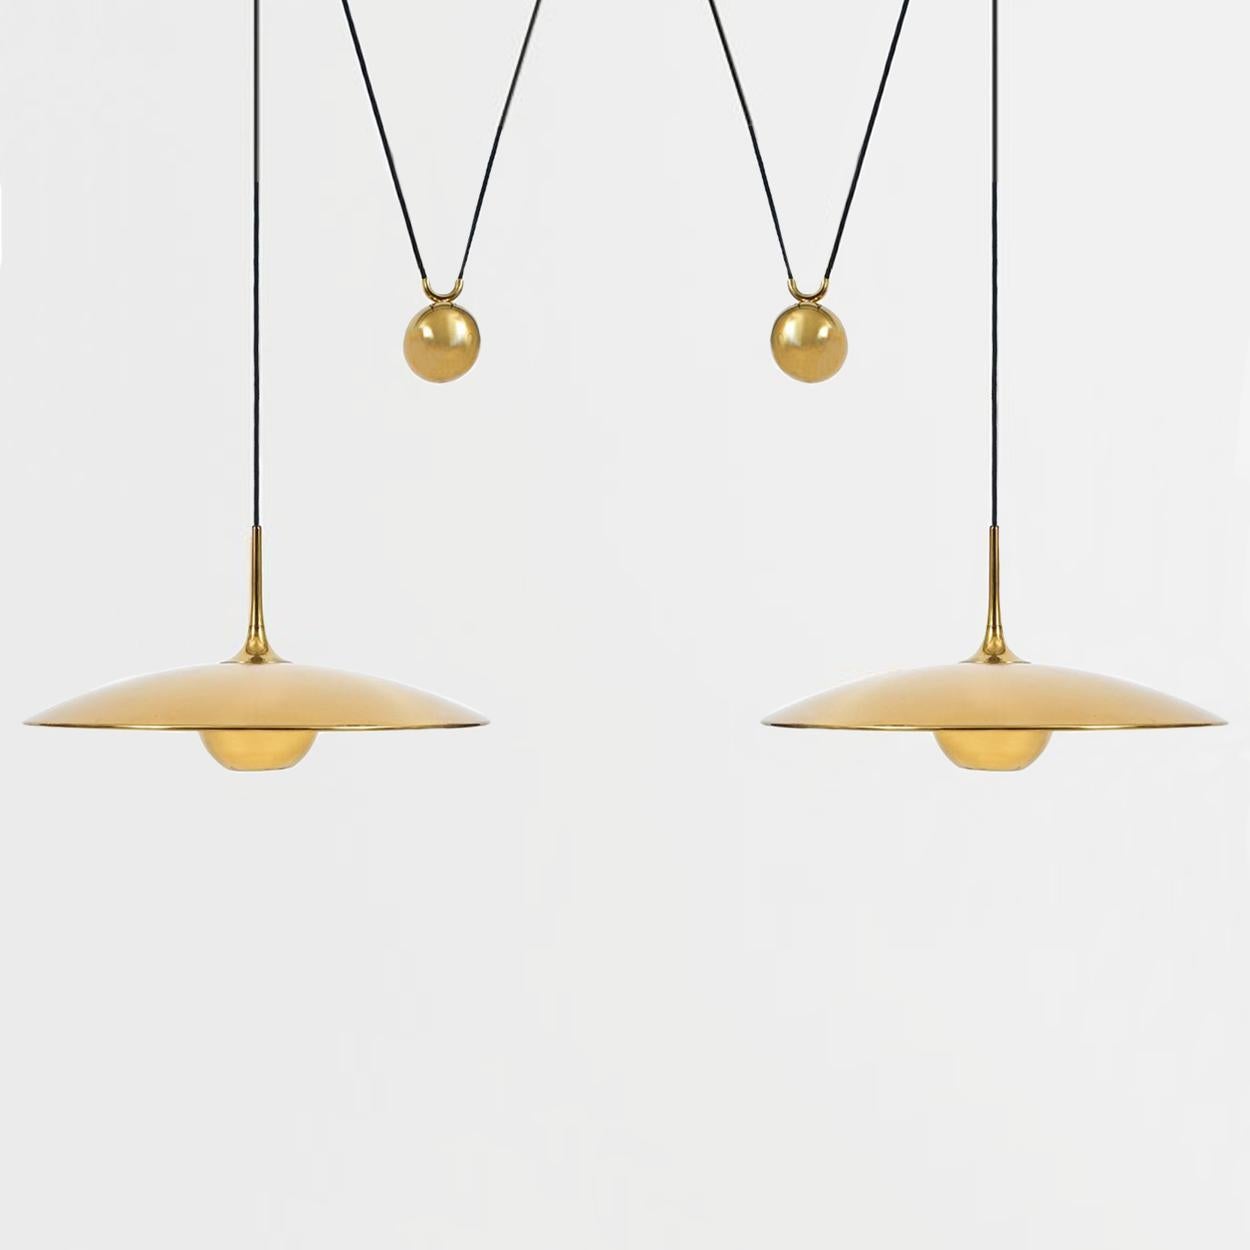 Fantastic Florian Schulz double counter balance pendants by Florian Schulz. Design period 1970-1979 production period 2000-2009

Two polished brass pendants suspended with their own brass ball counter balance. One canopy supports both pendants.